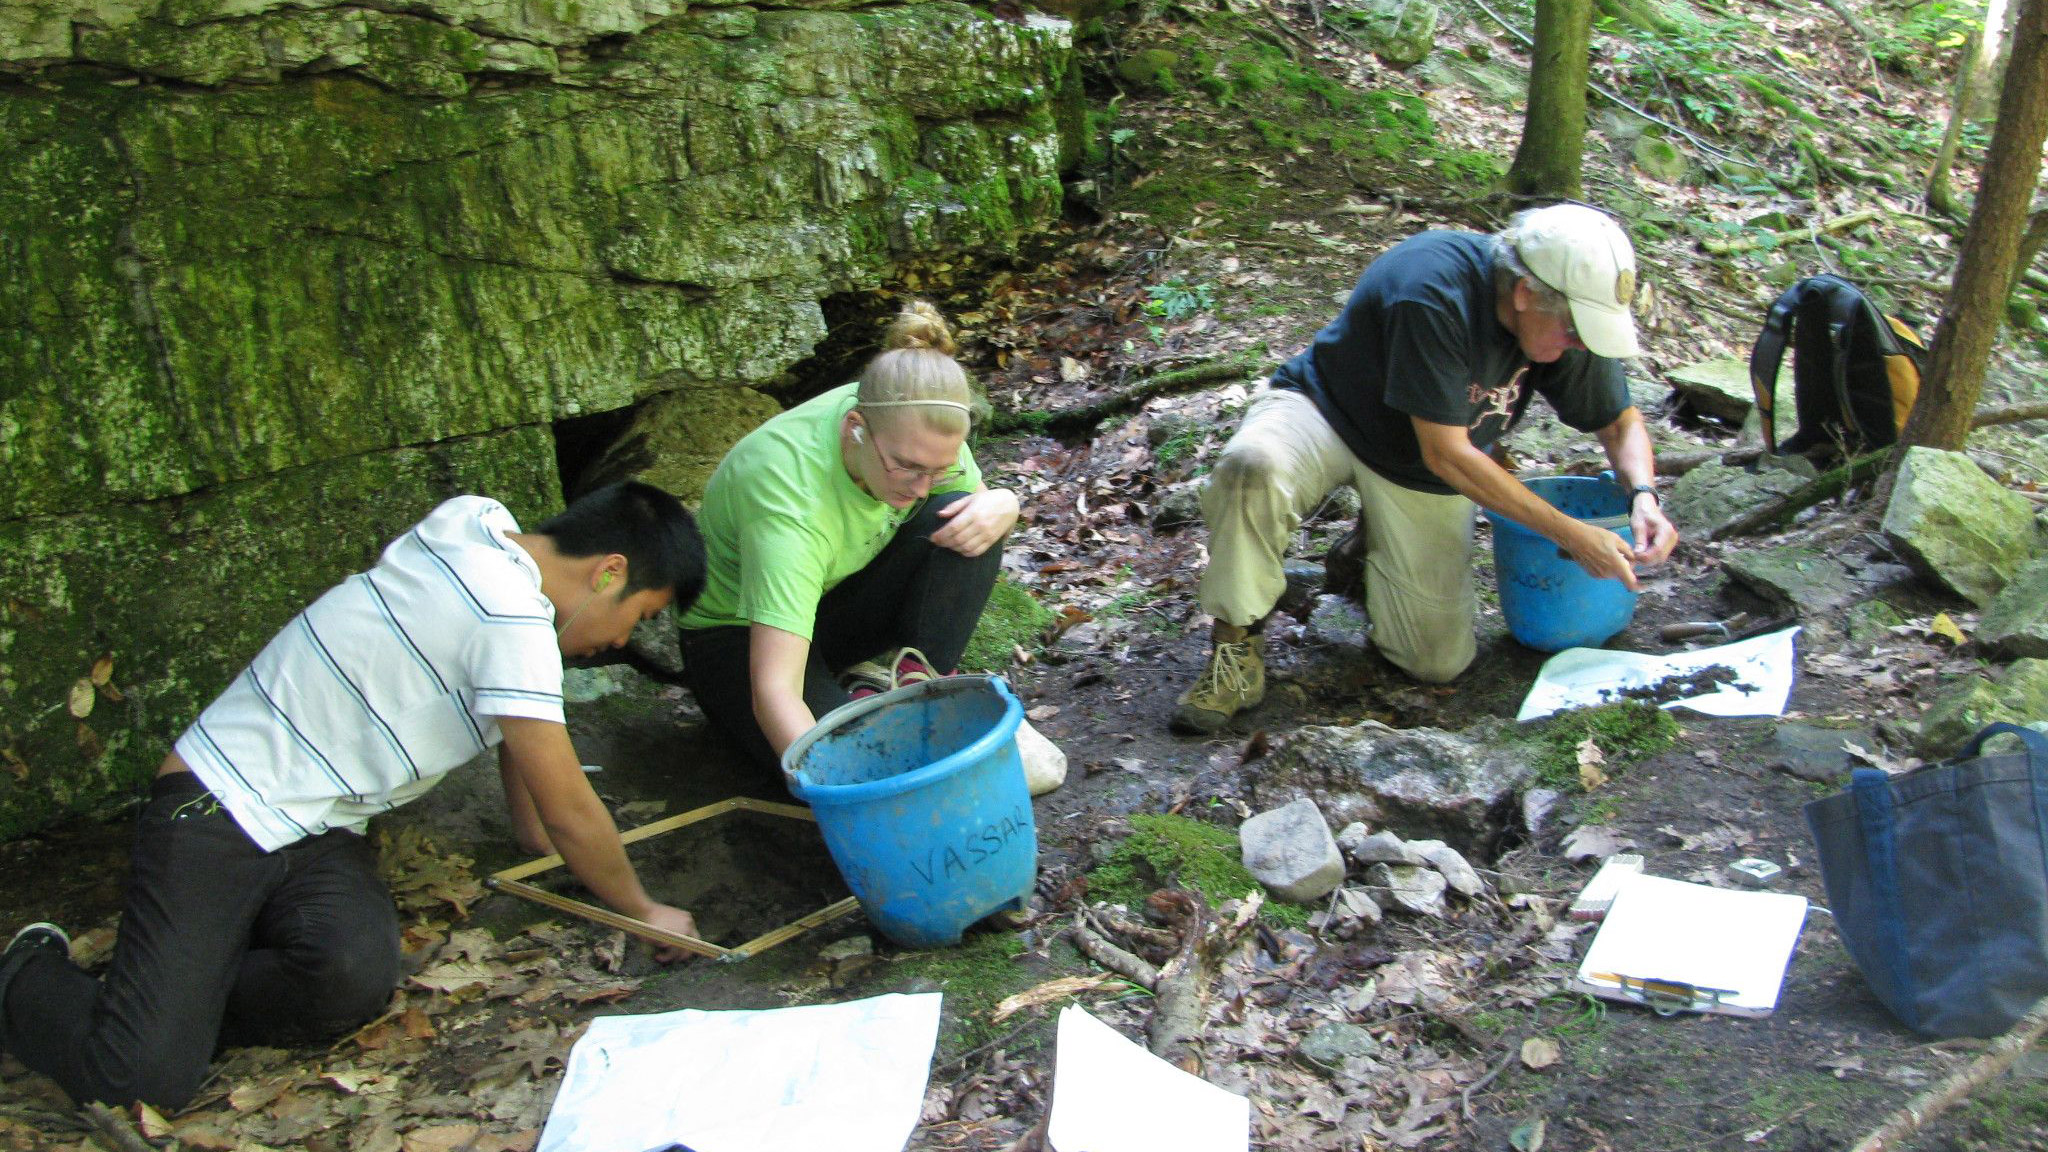 People participating in a geological excavation.